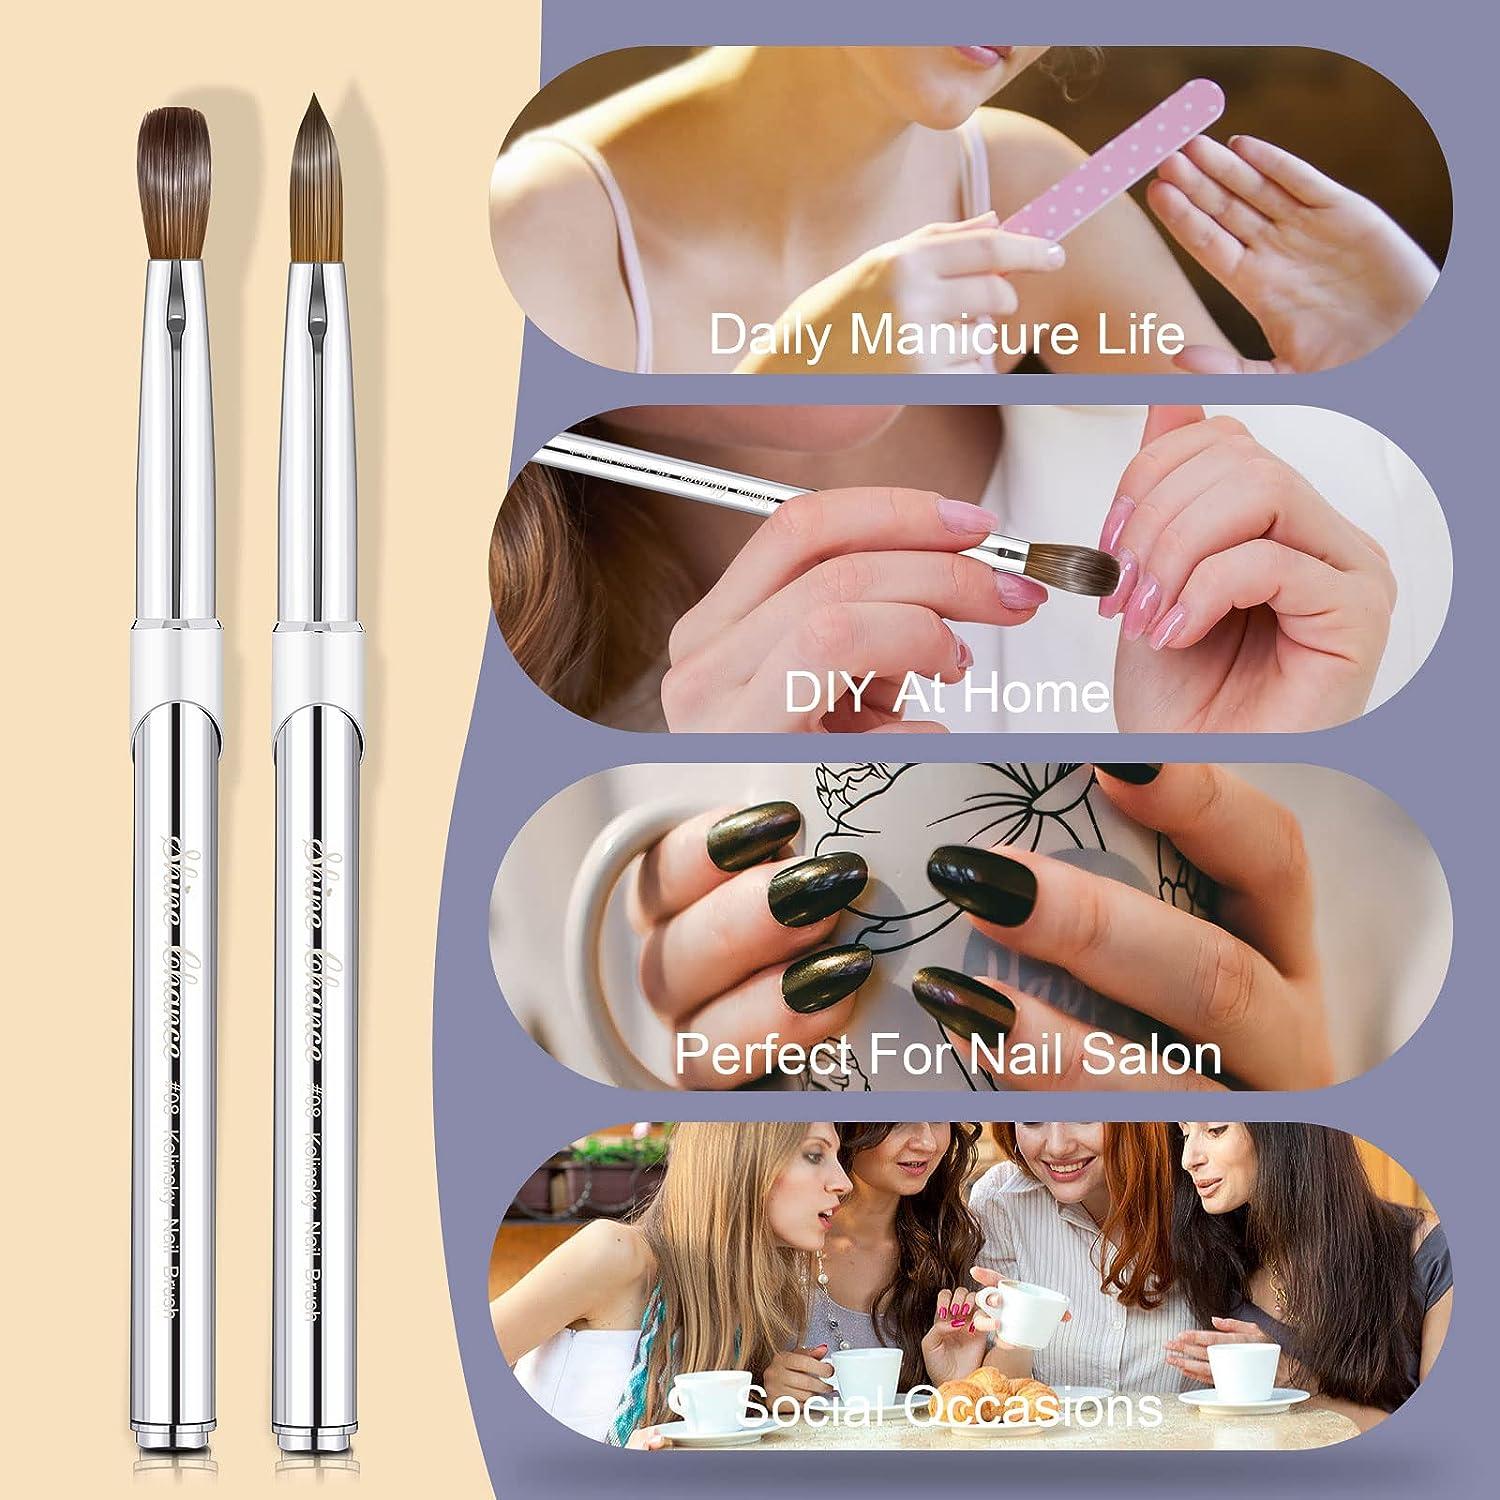 Shine Chance Acrylic Nail Art Brush Size 16, 100% Pure Kolinsky Hair Oval  Nail Brush for Acrylic Application, Professional Nail Extension Manicure  Tool Striping Nail Drawing Pen for DIY Home Salon 